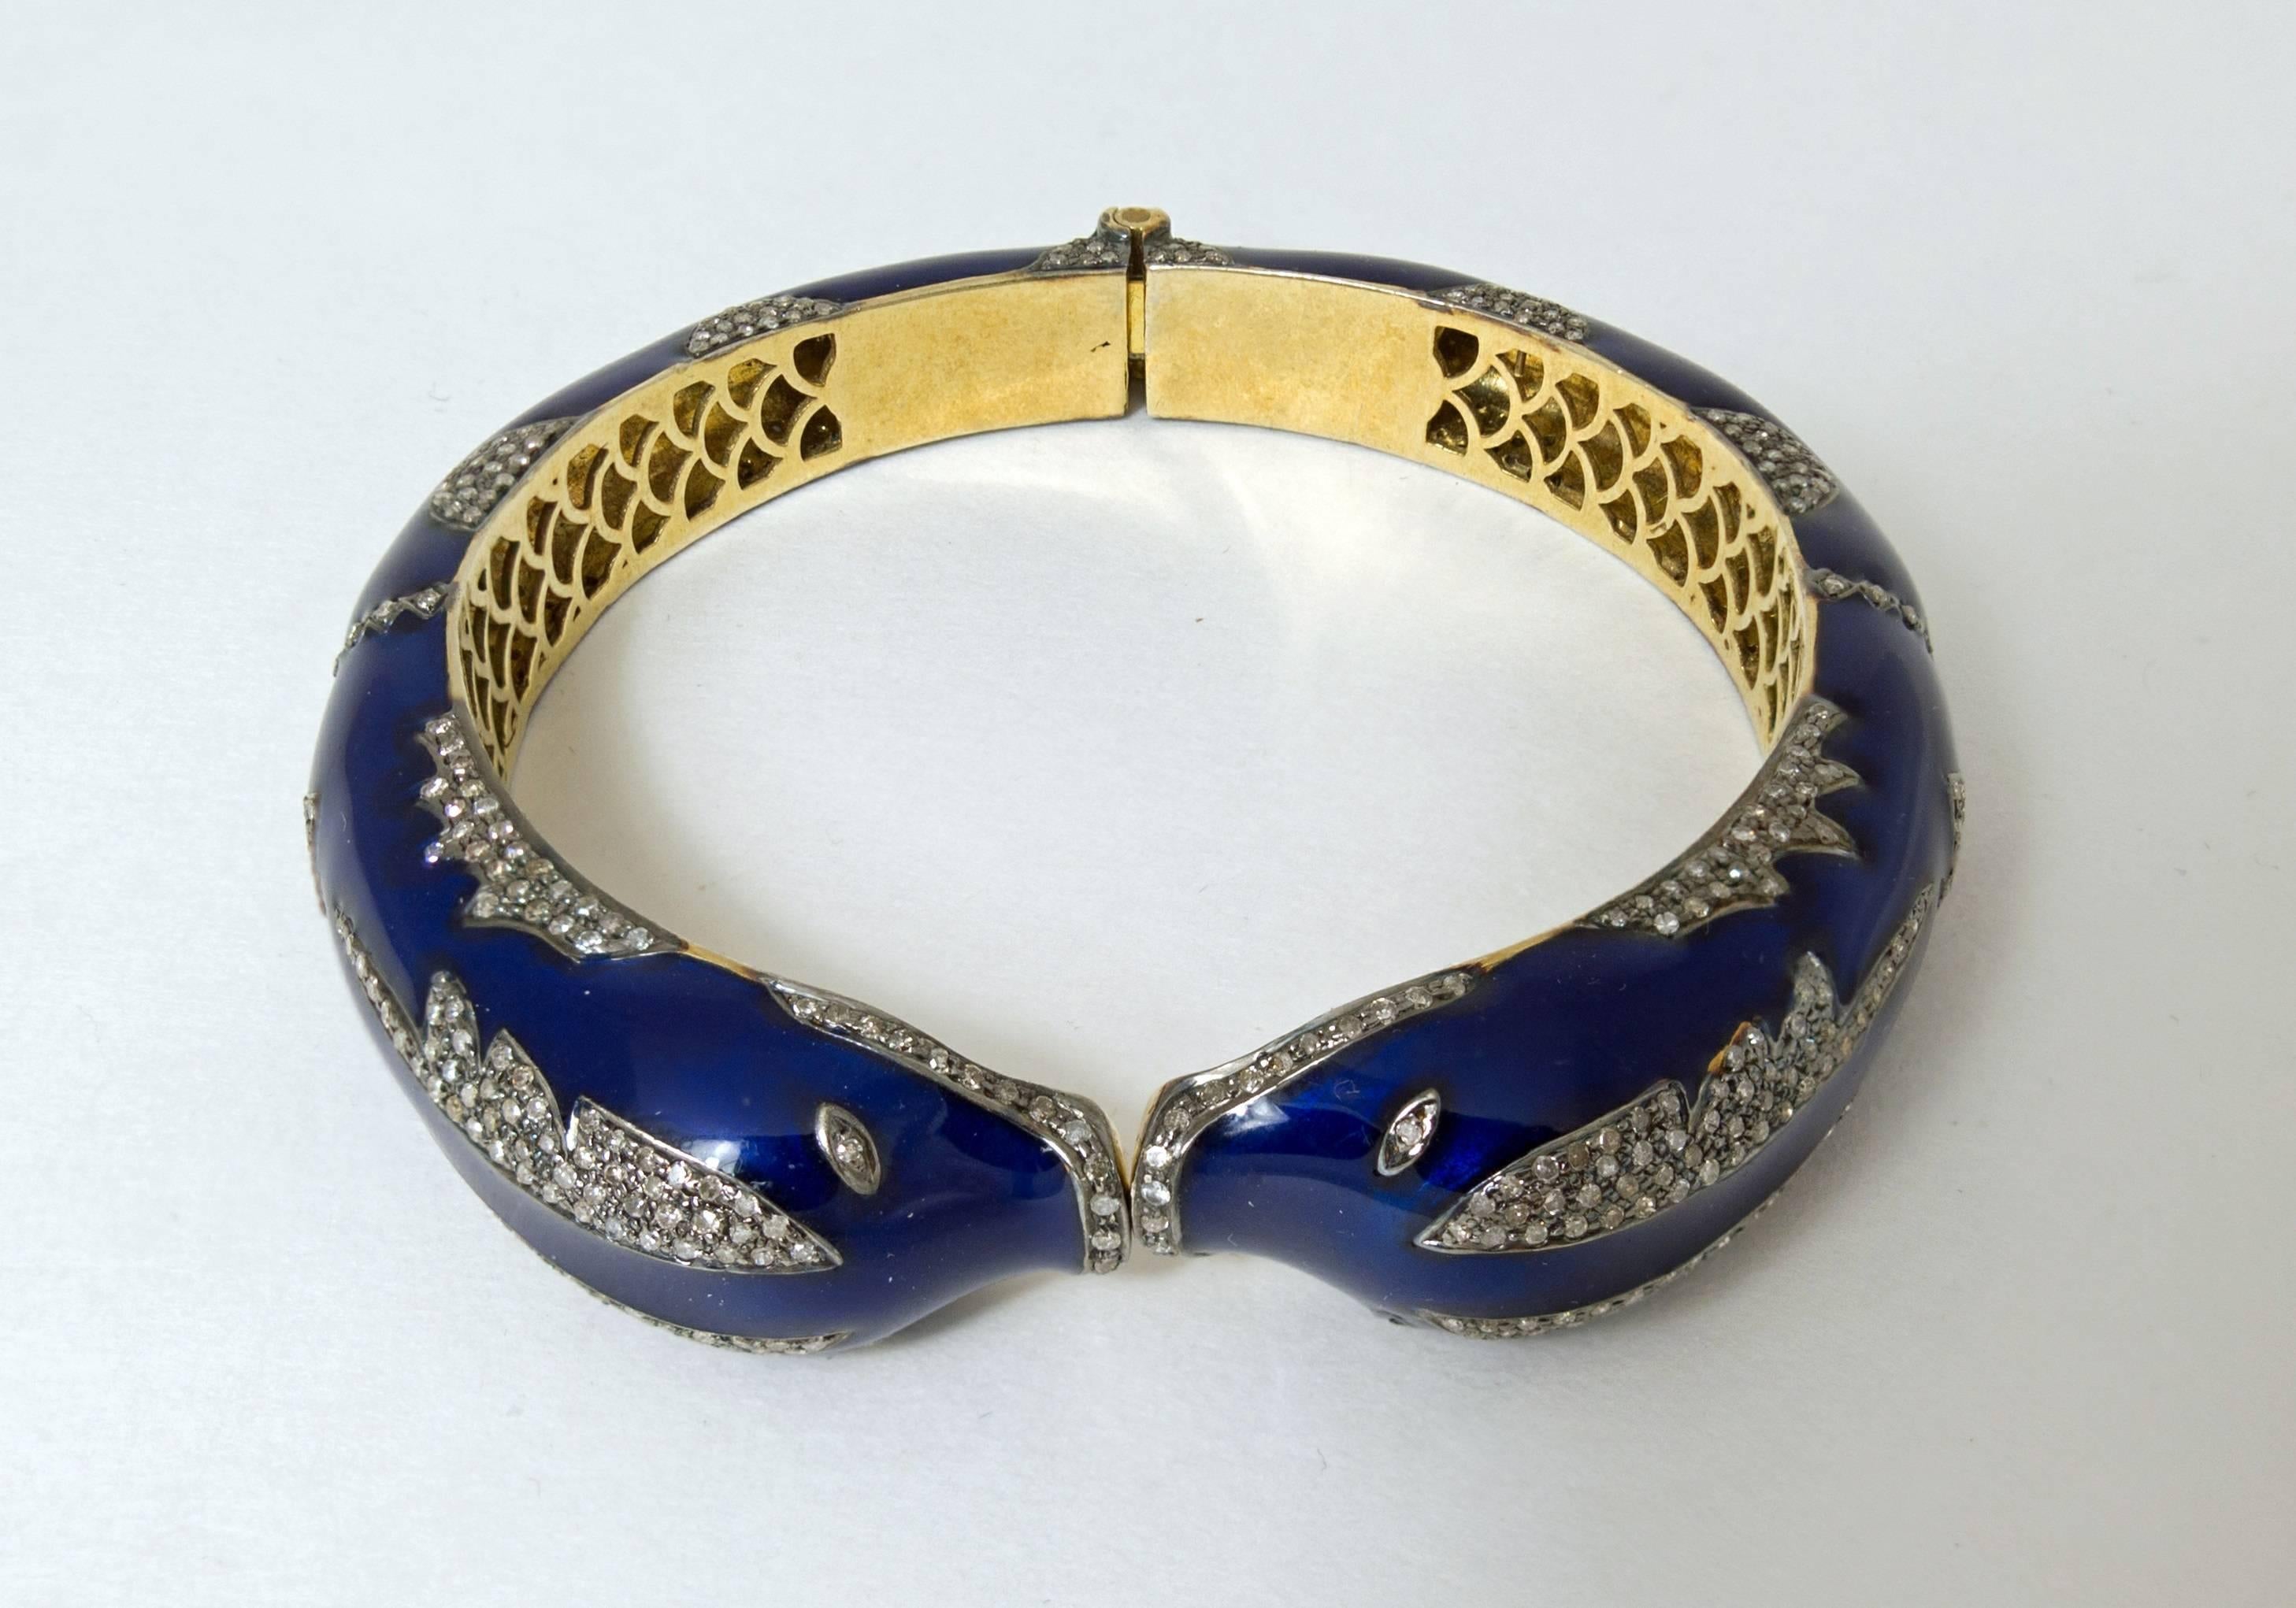 A fine, elegant  lady's hinged bangle bracelet with kissing dolphin design. Crafted in 18 k yellow gold, blue enamel with 544 single cut diamonds, bead set, totaling 4.08 carats. Made in Russia in 1950's. Interior diameter 58 mm x 53 mm, outer